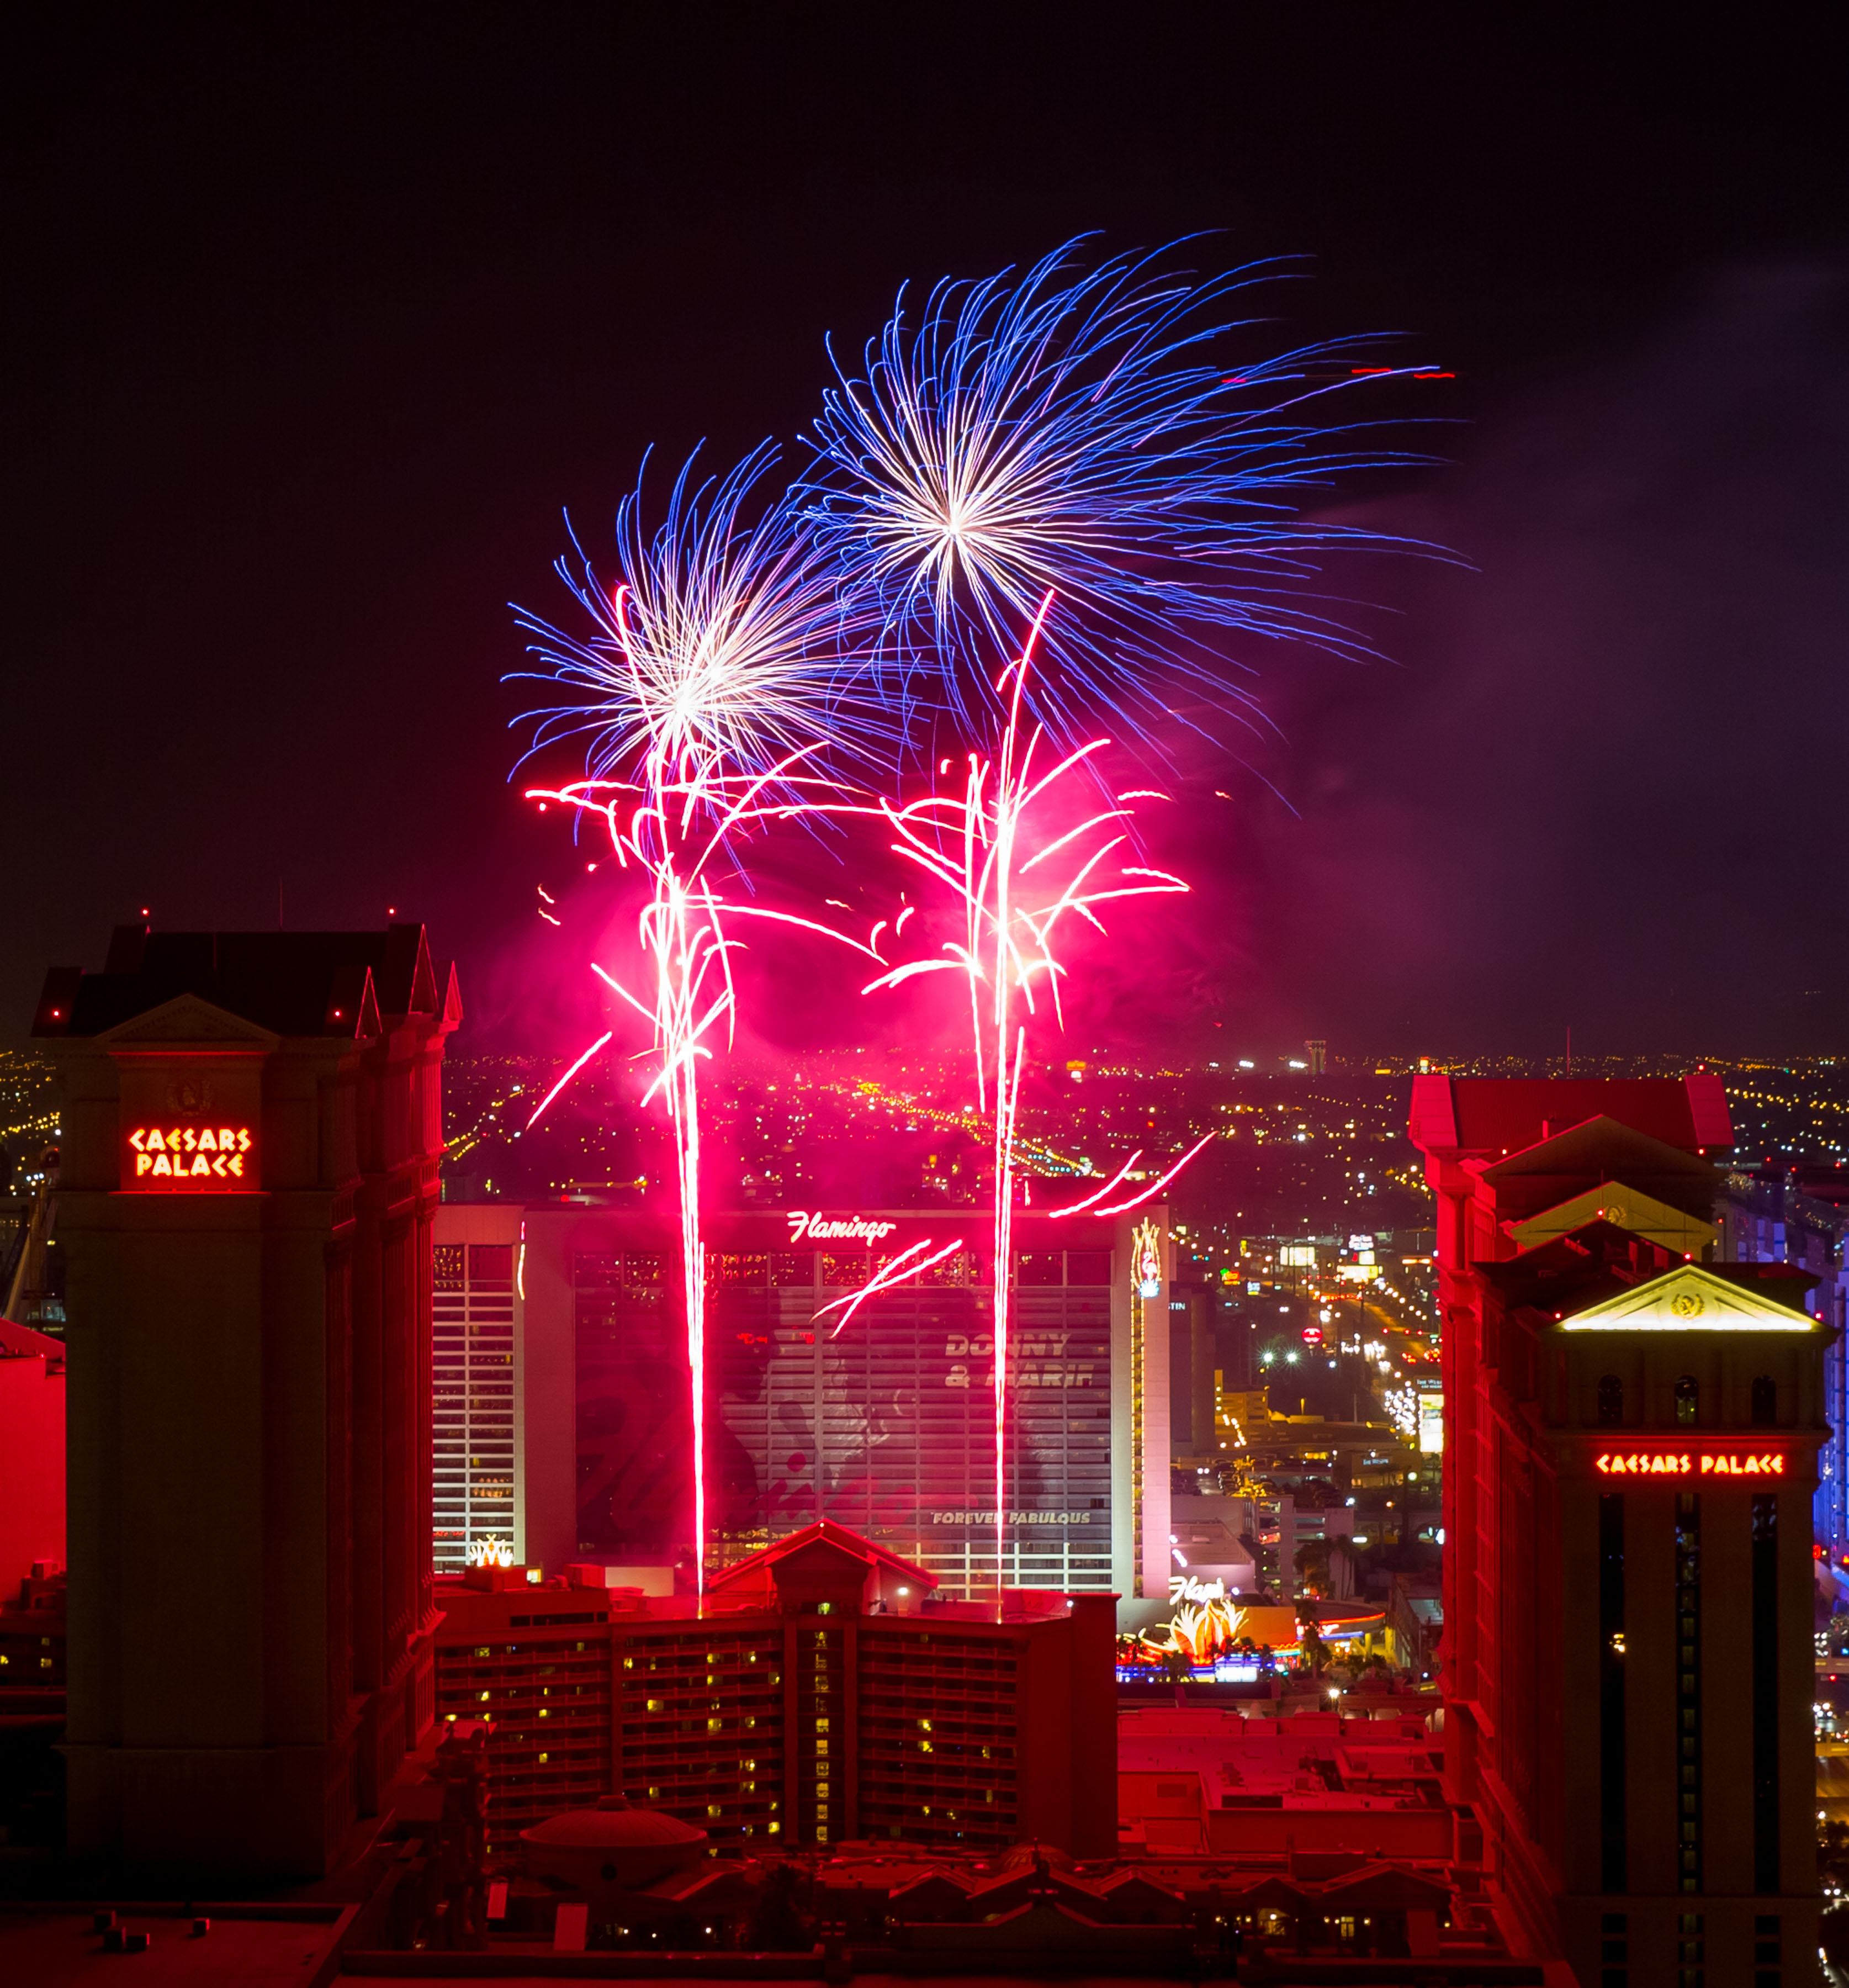 Show Caption Las Vegas Nv July 4 4th Of July Fireworks Display At    